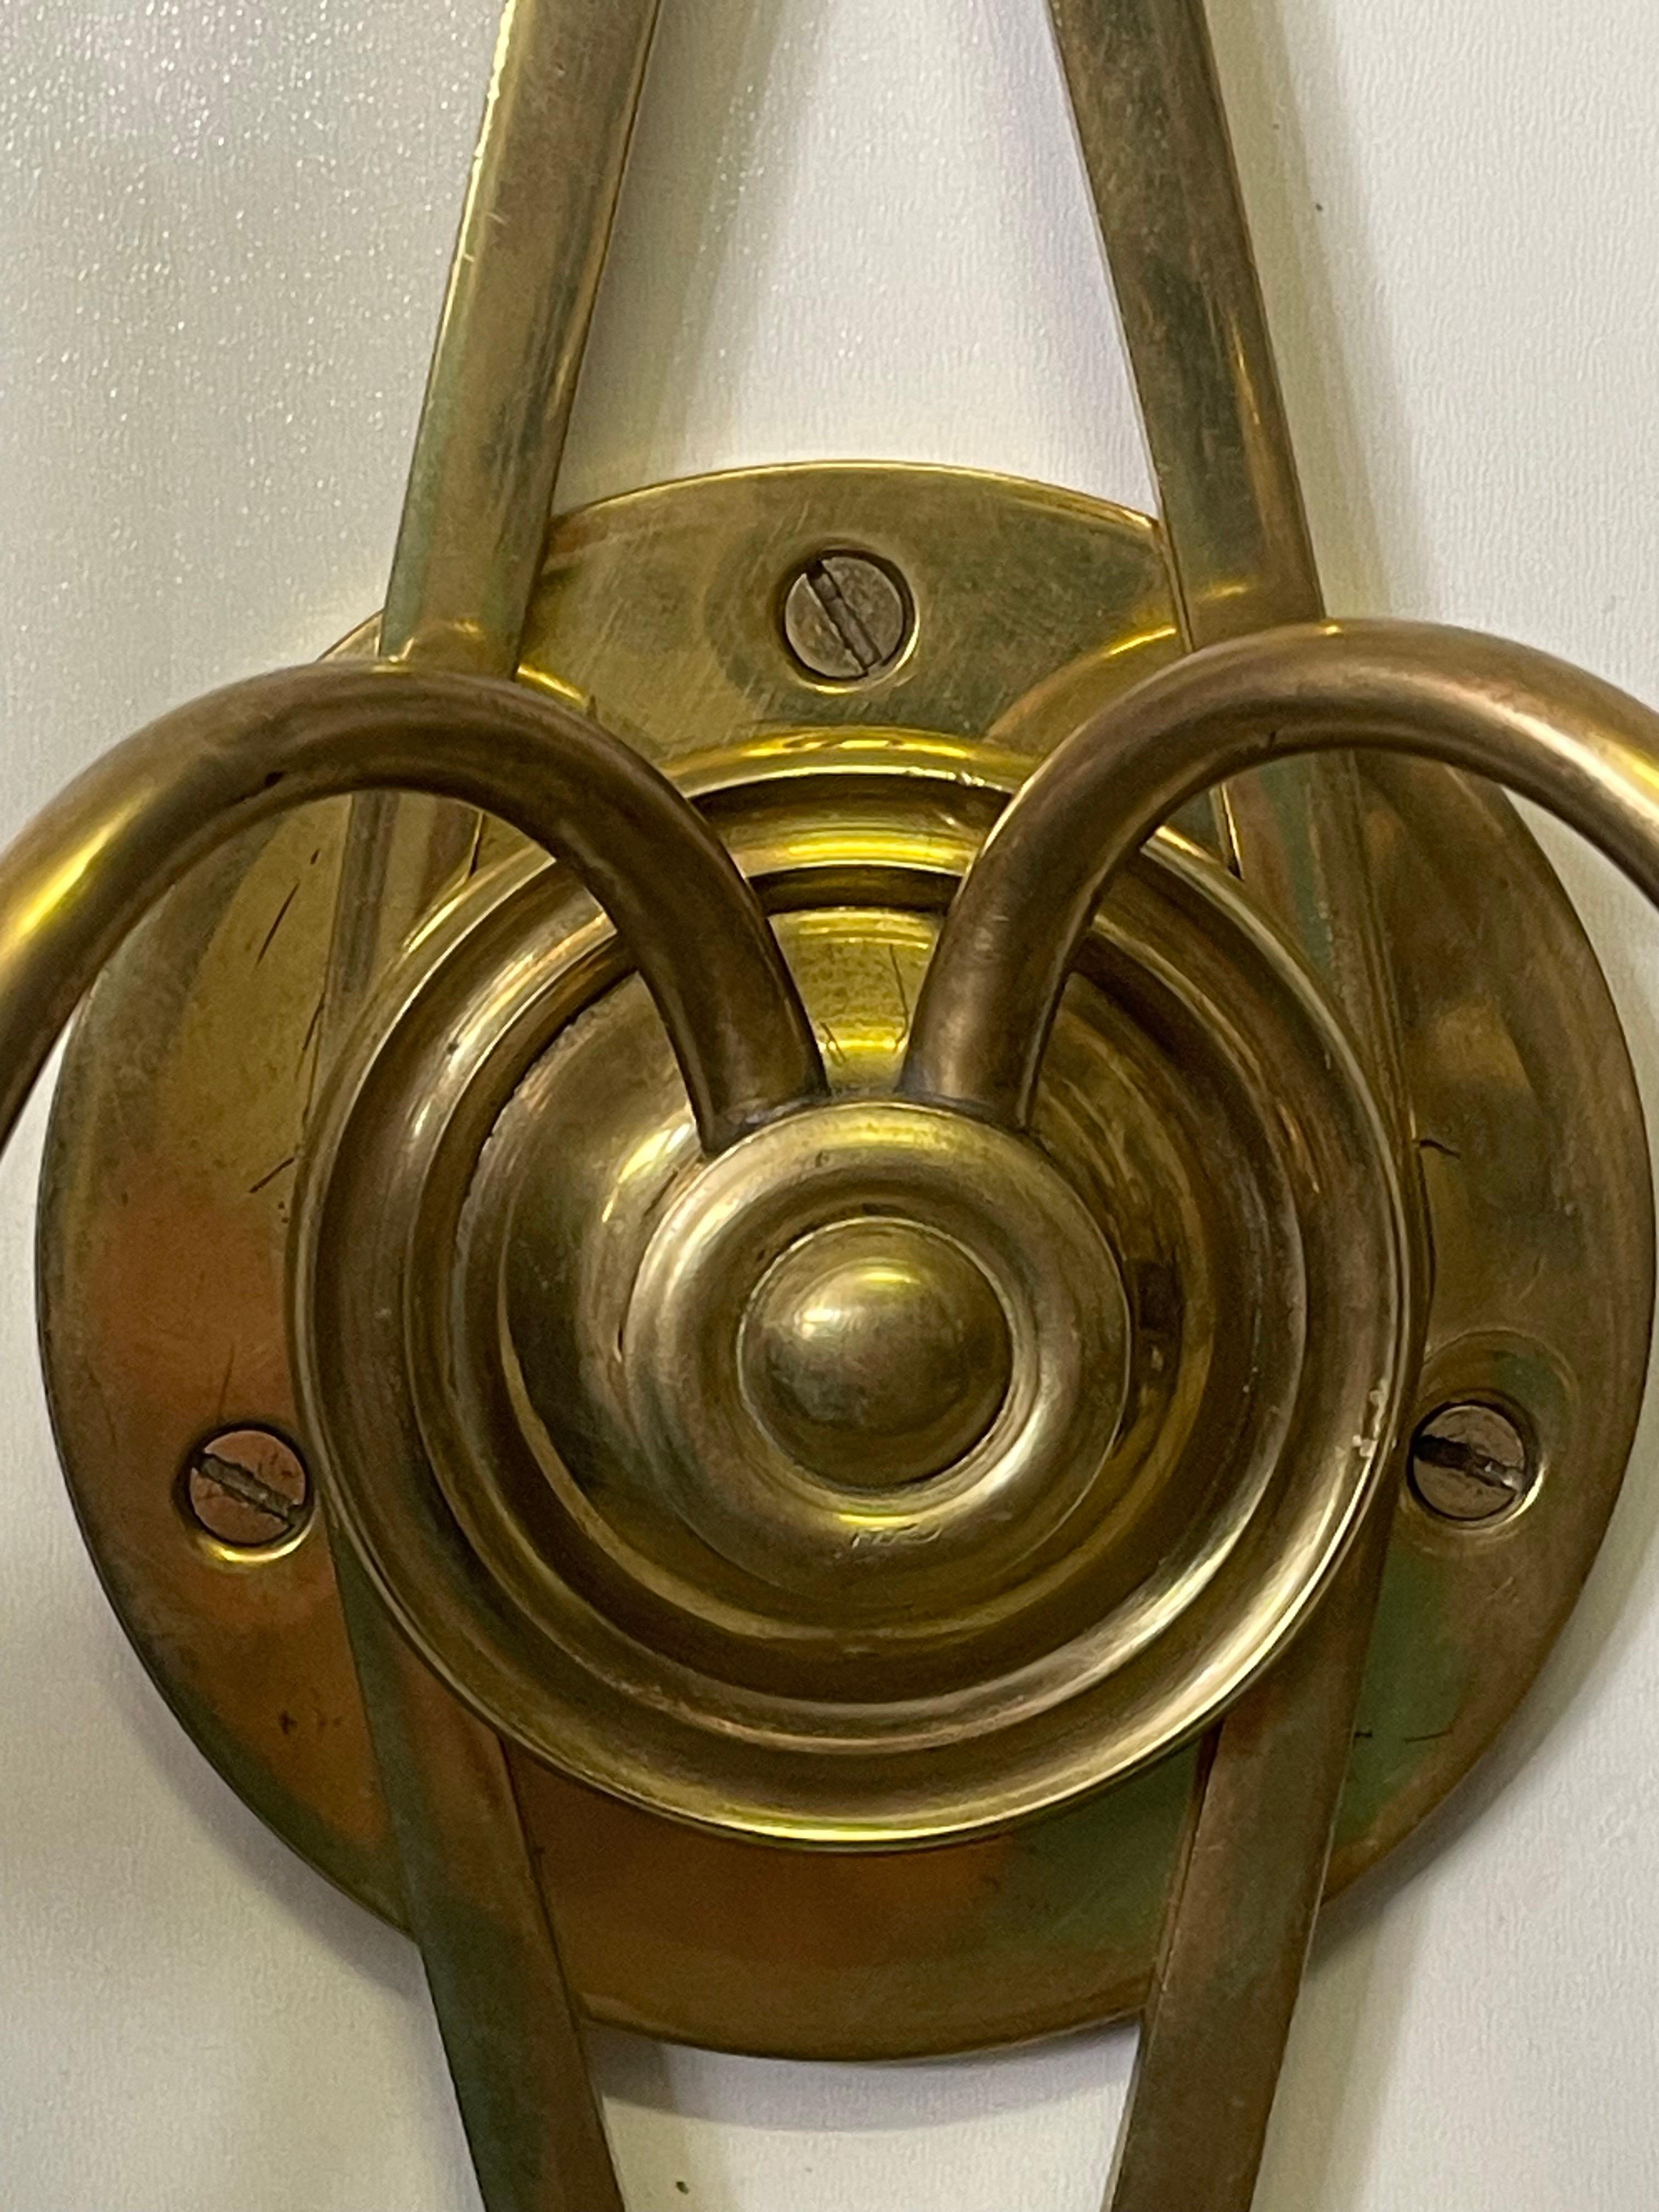 Rare Pair of Polished Brass Wall Sconces by Maison Baguès, Paris, circa 1950s In Good Condition For Sale In Wiesbaden, Hessen